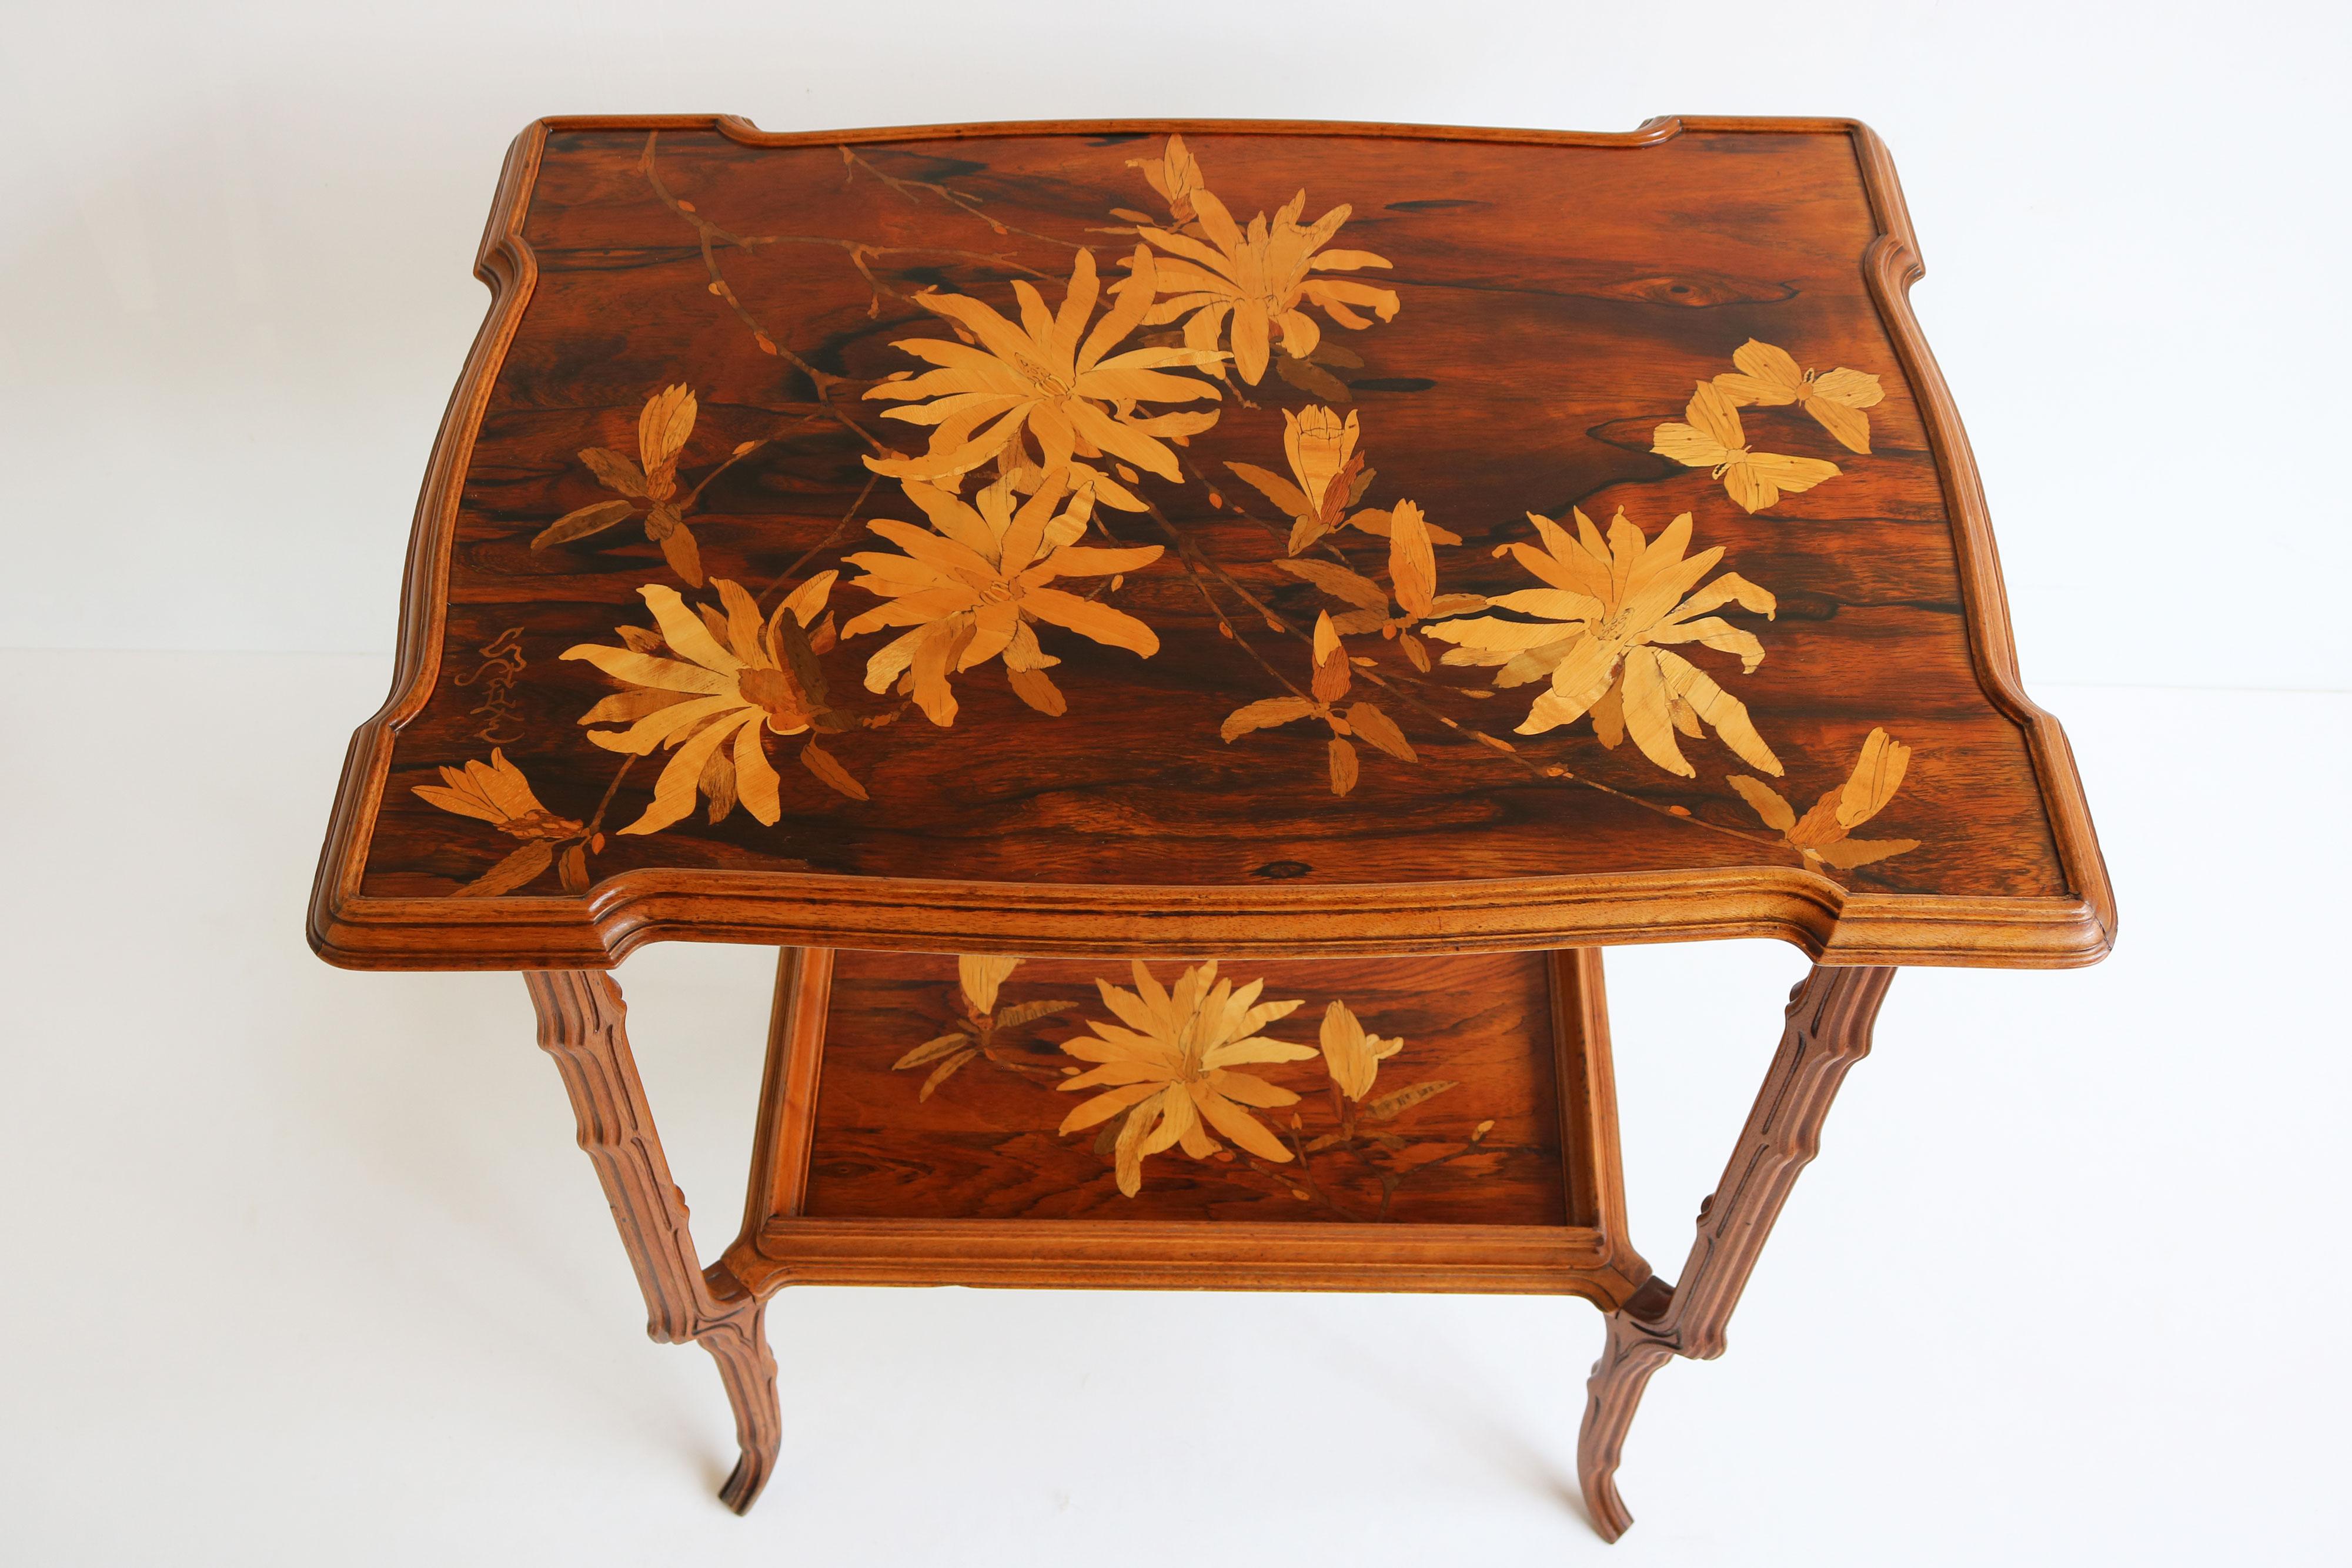 Original French Art Nouveau Marquetry Table ''Japonisme'' by Emile Galle 1900 For Sale 5